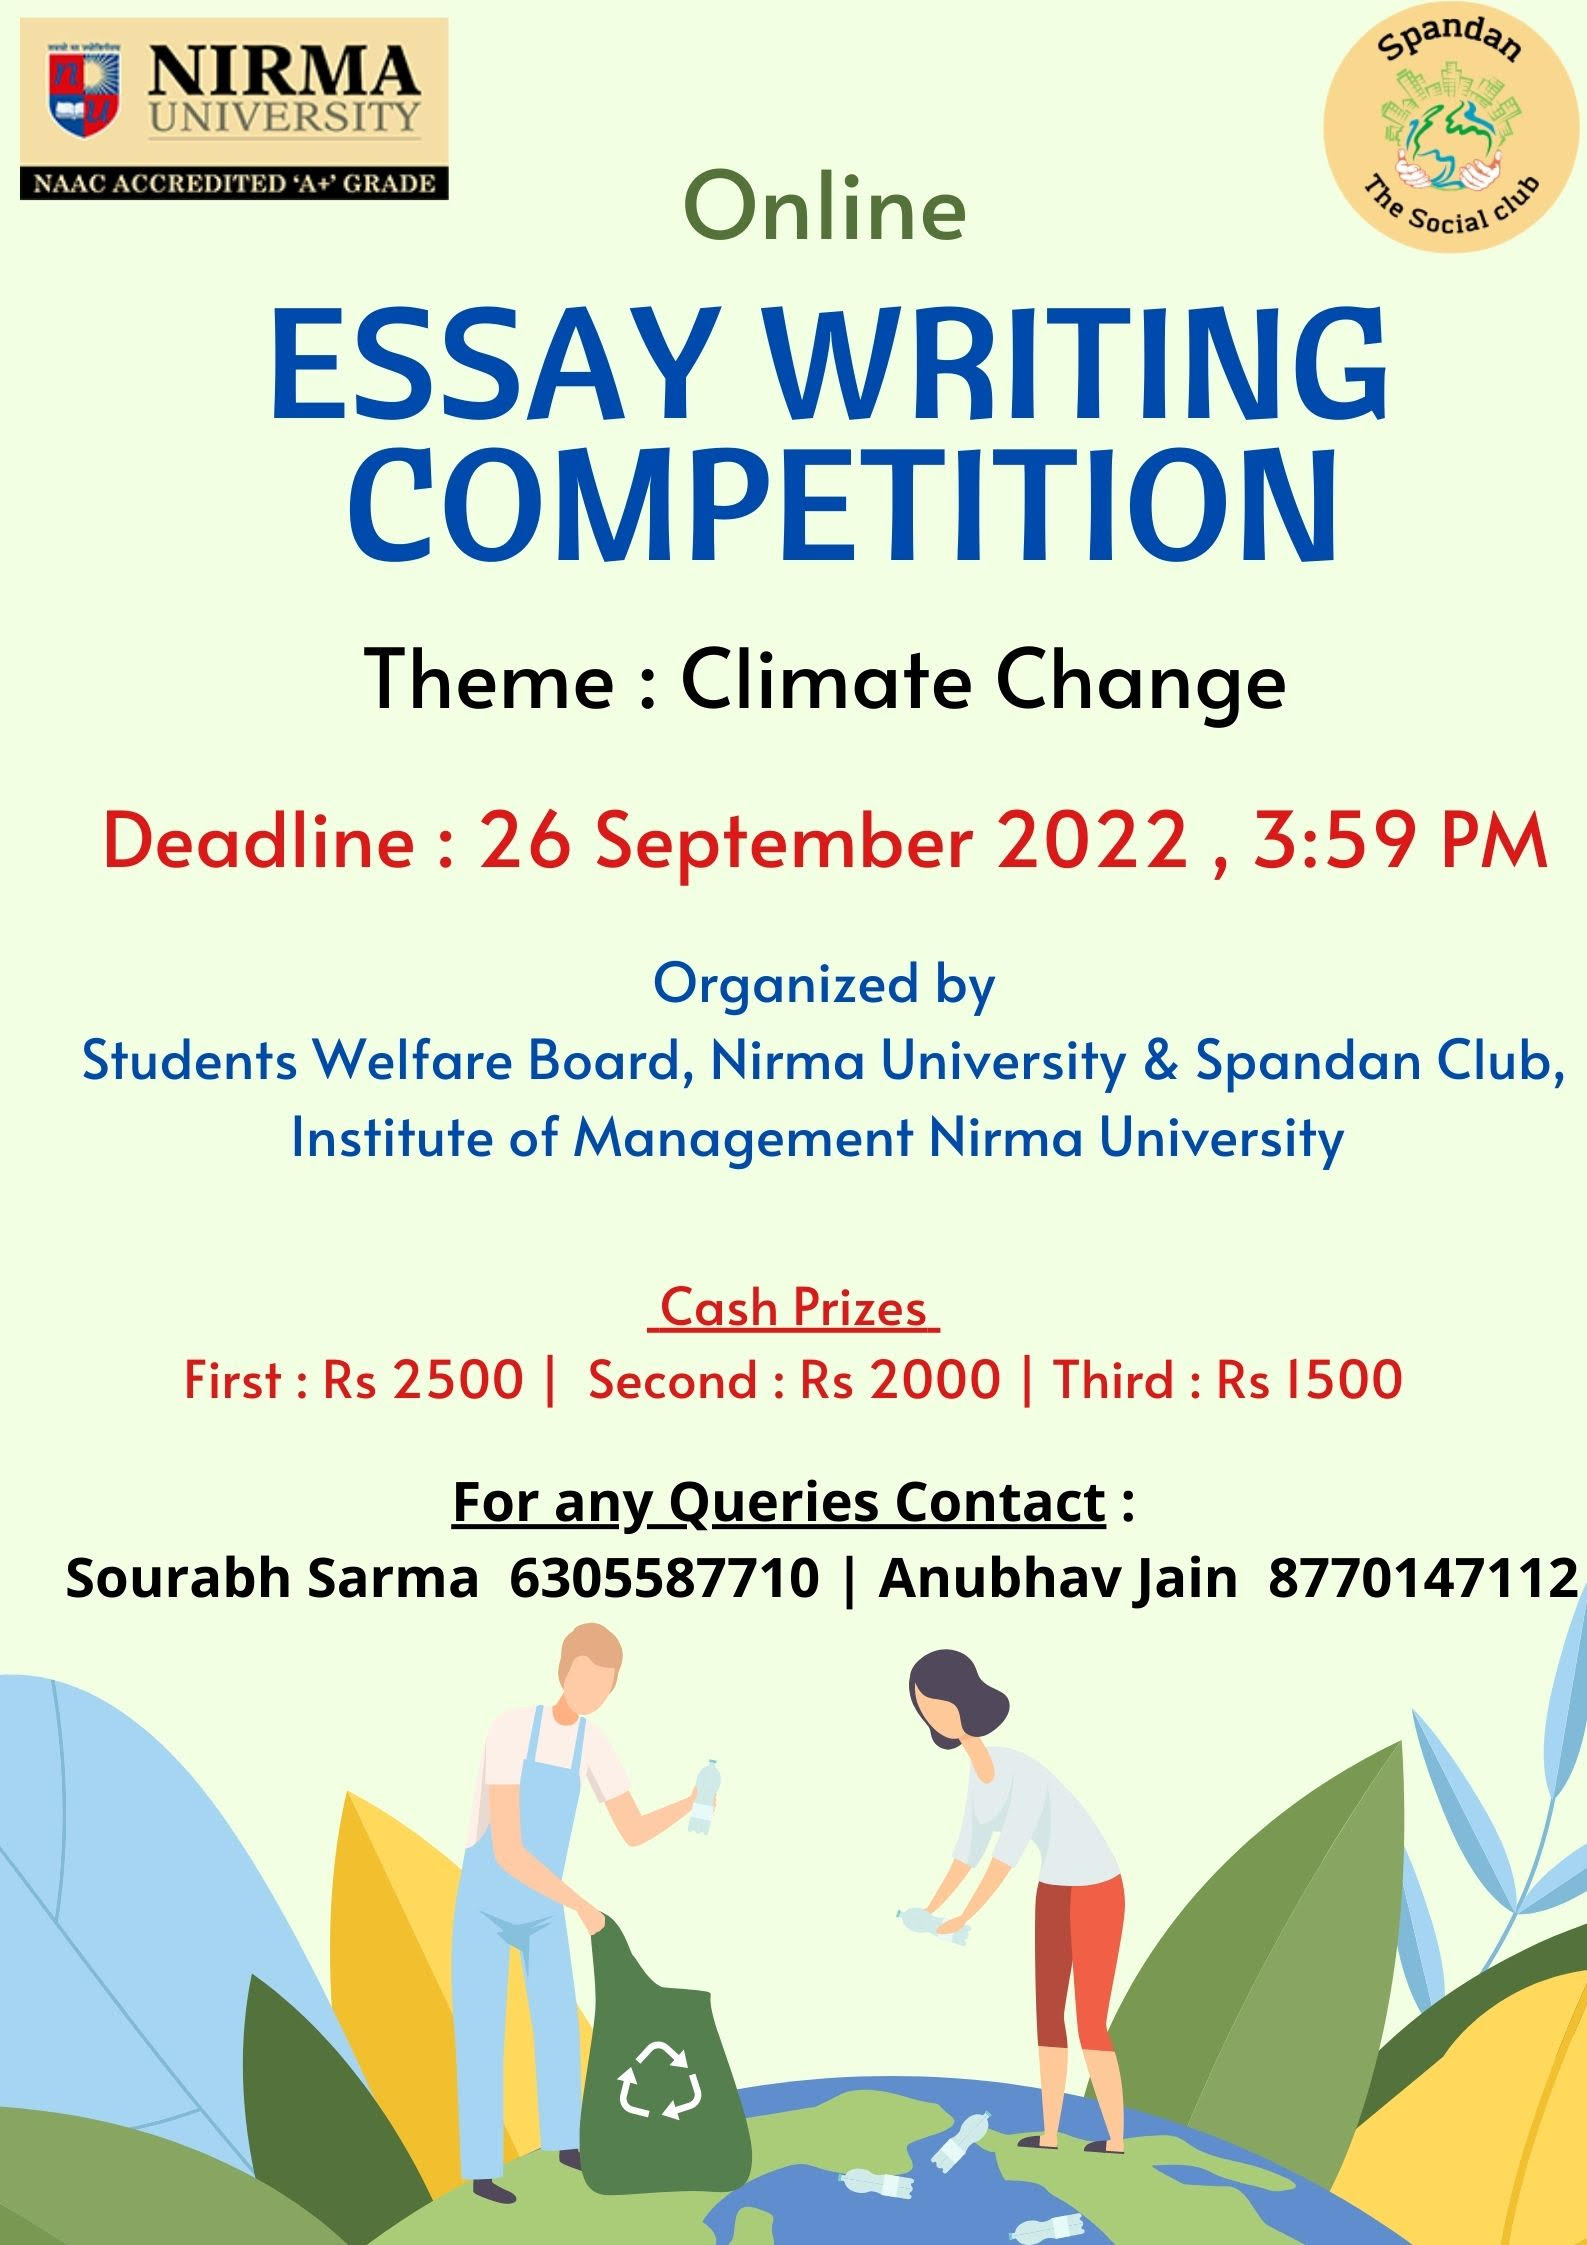 an online essay writing competition is conducted